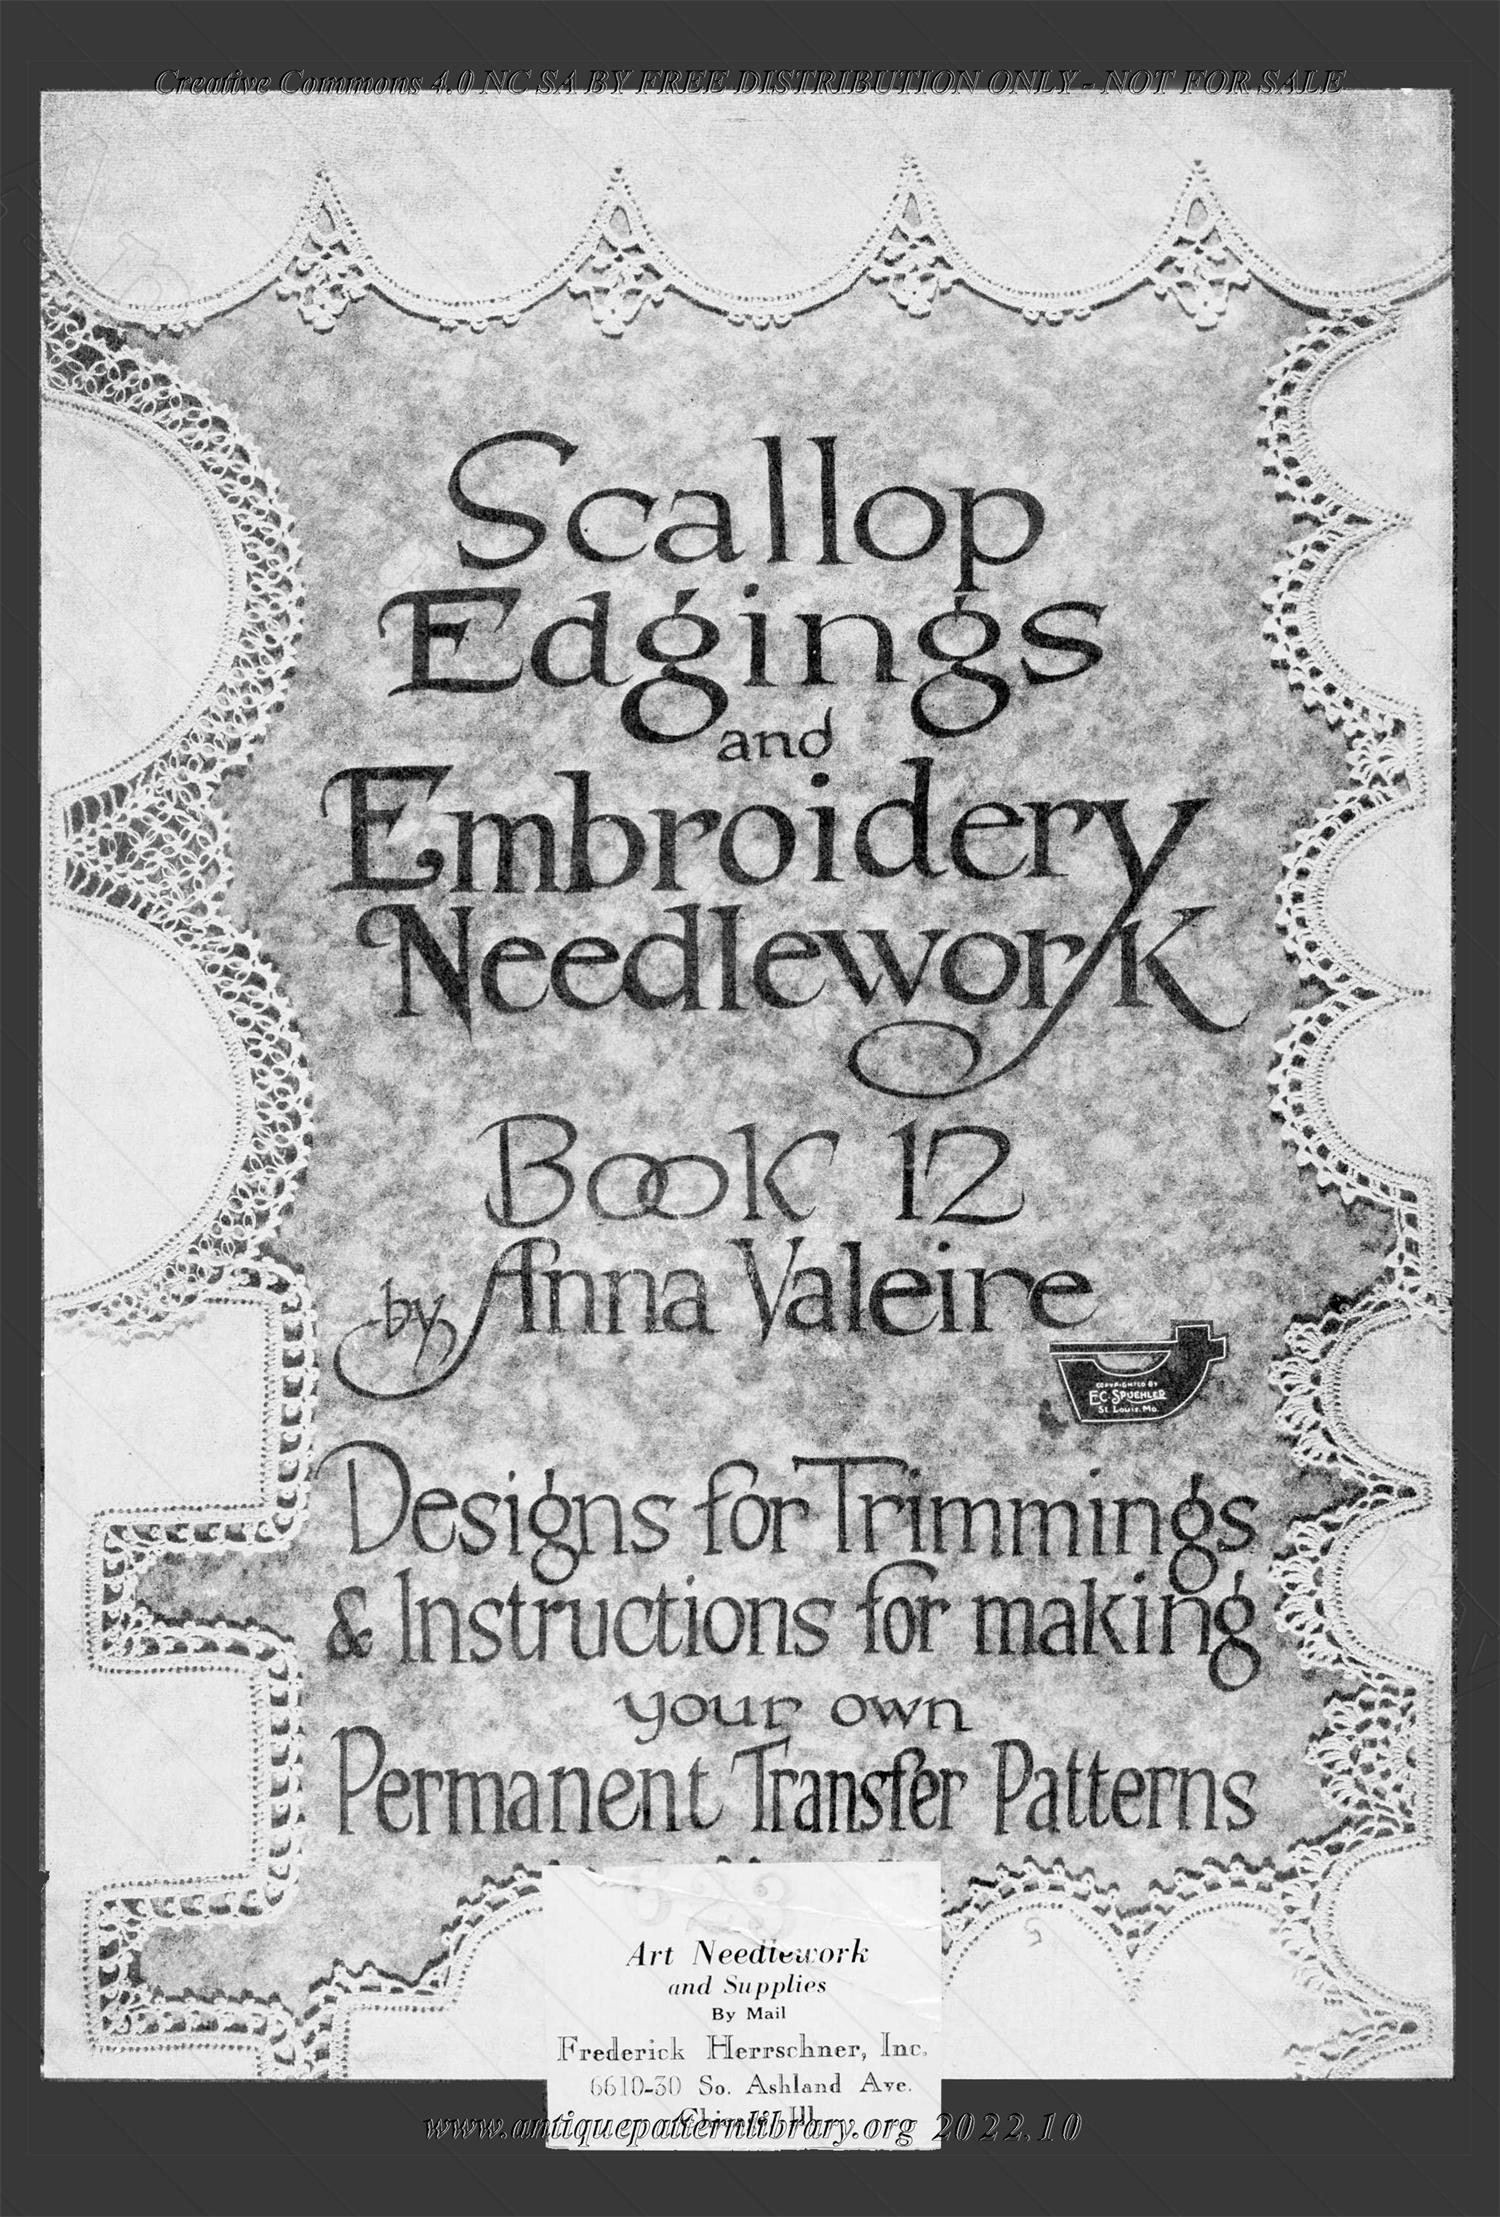 M-HW003 Scallop Edgings and Embroidery Needlework Book 12